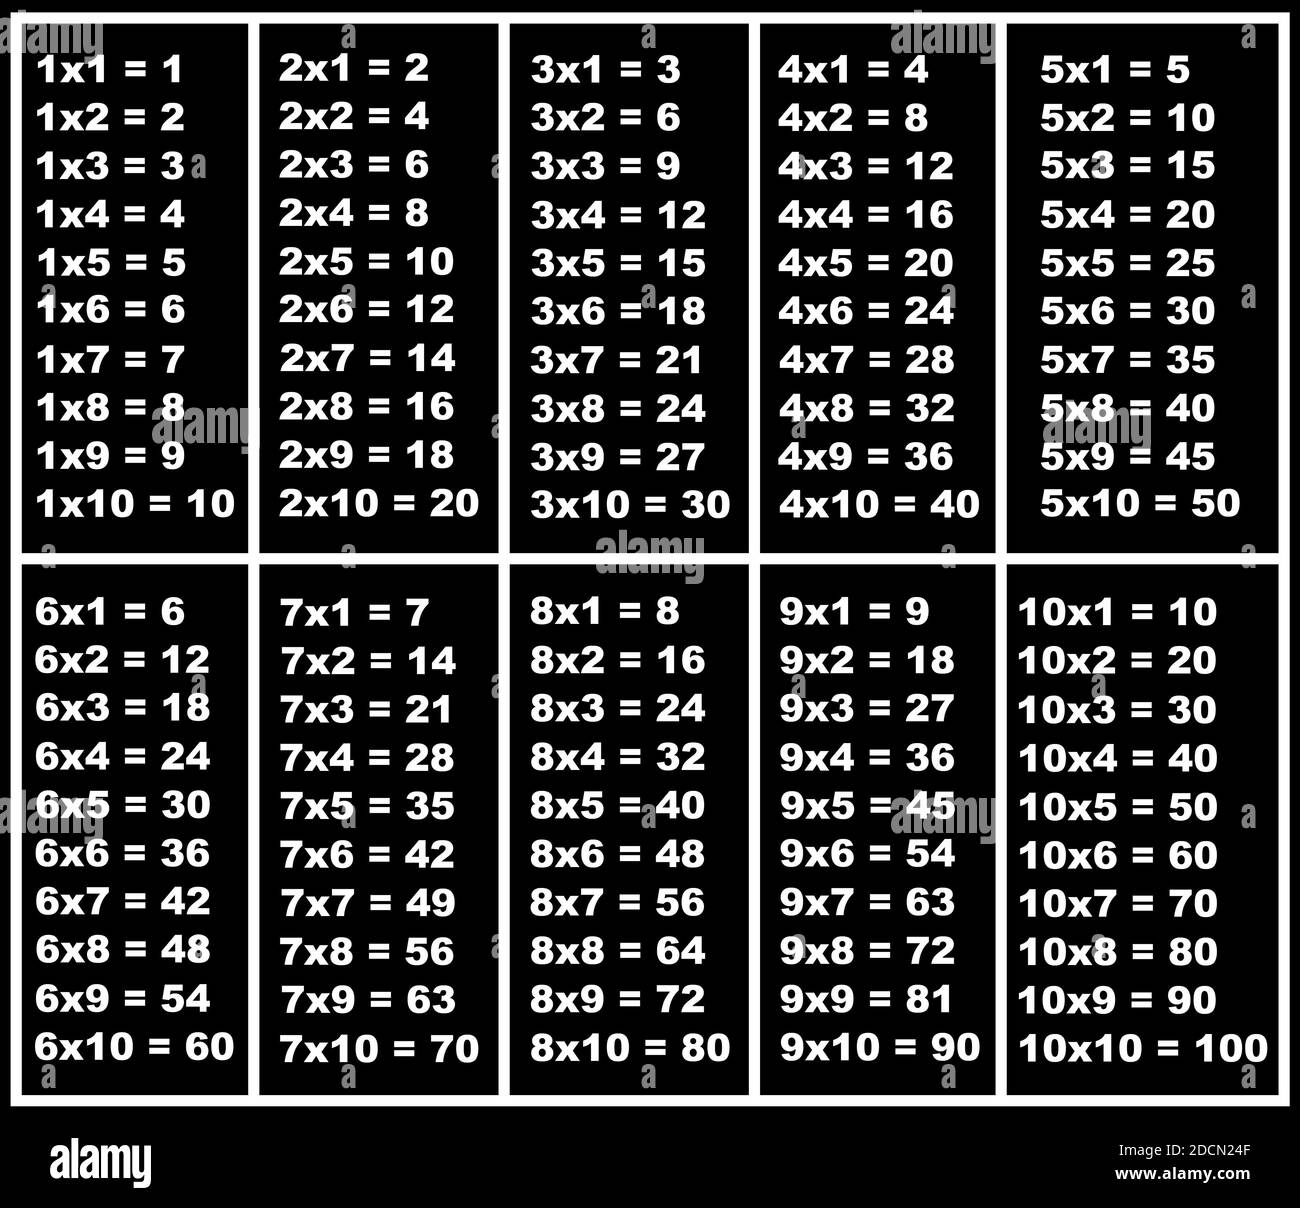 Multiplication table Black and White Stock Photos & Images - Alamy